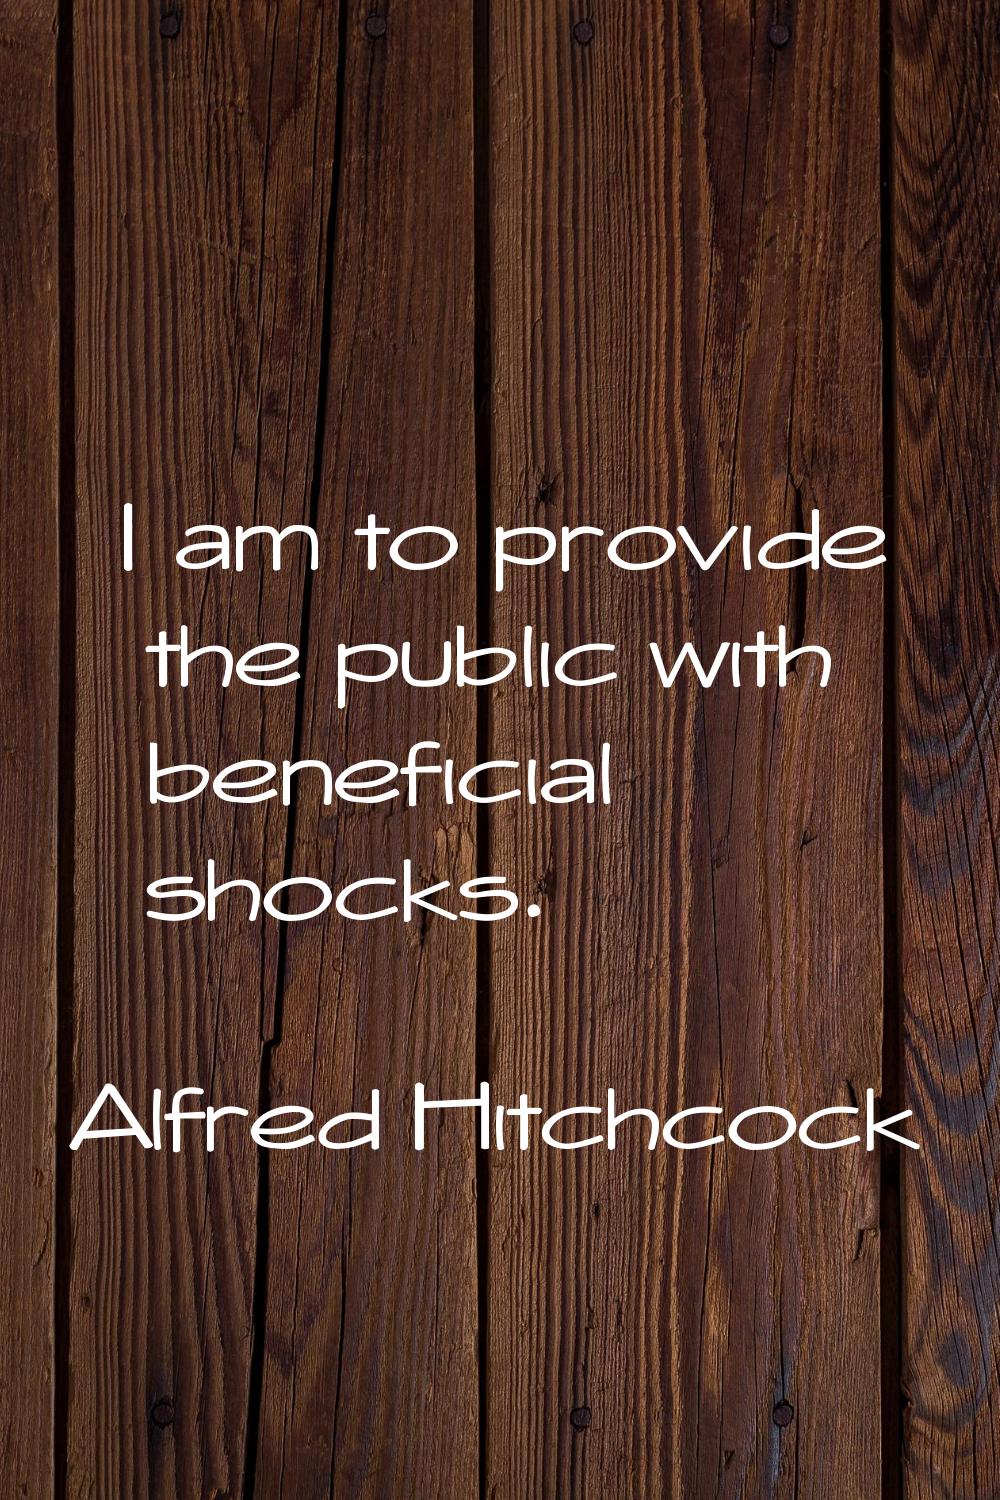 I am to provide the public with beneficial shocks.